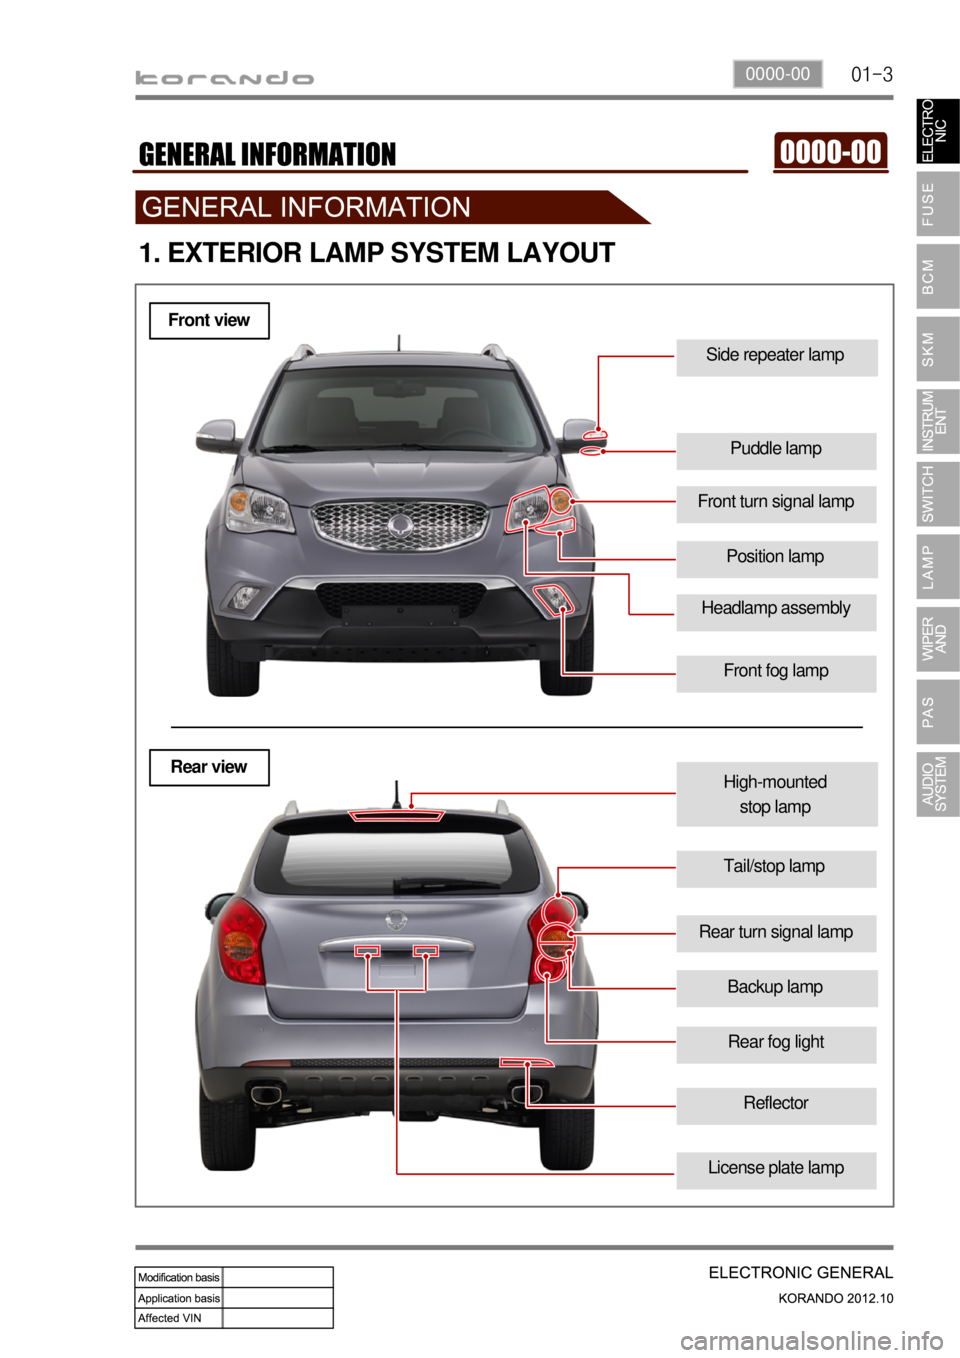 SSANGYONG KORANDO 2012  Service Manual 01-30000-00
Front turn signal lamp
Side repeater lamp
Puddle lamp
1. EXTERIOR LAMP SYSTEM LAYOUT
Front fog lamp
Position lamp
Headlamp assembly
Rear turn signal lamp
High-mounted 
stop lamp
Tail/stop 